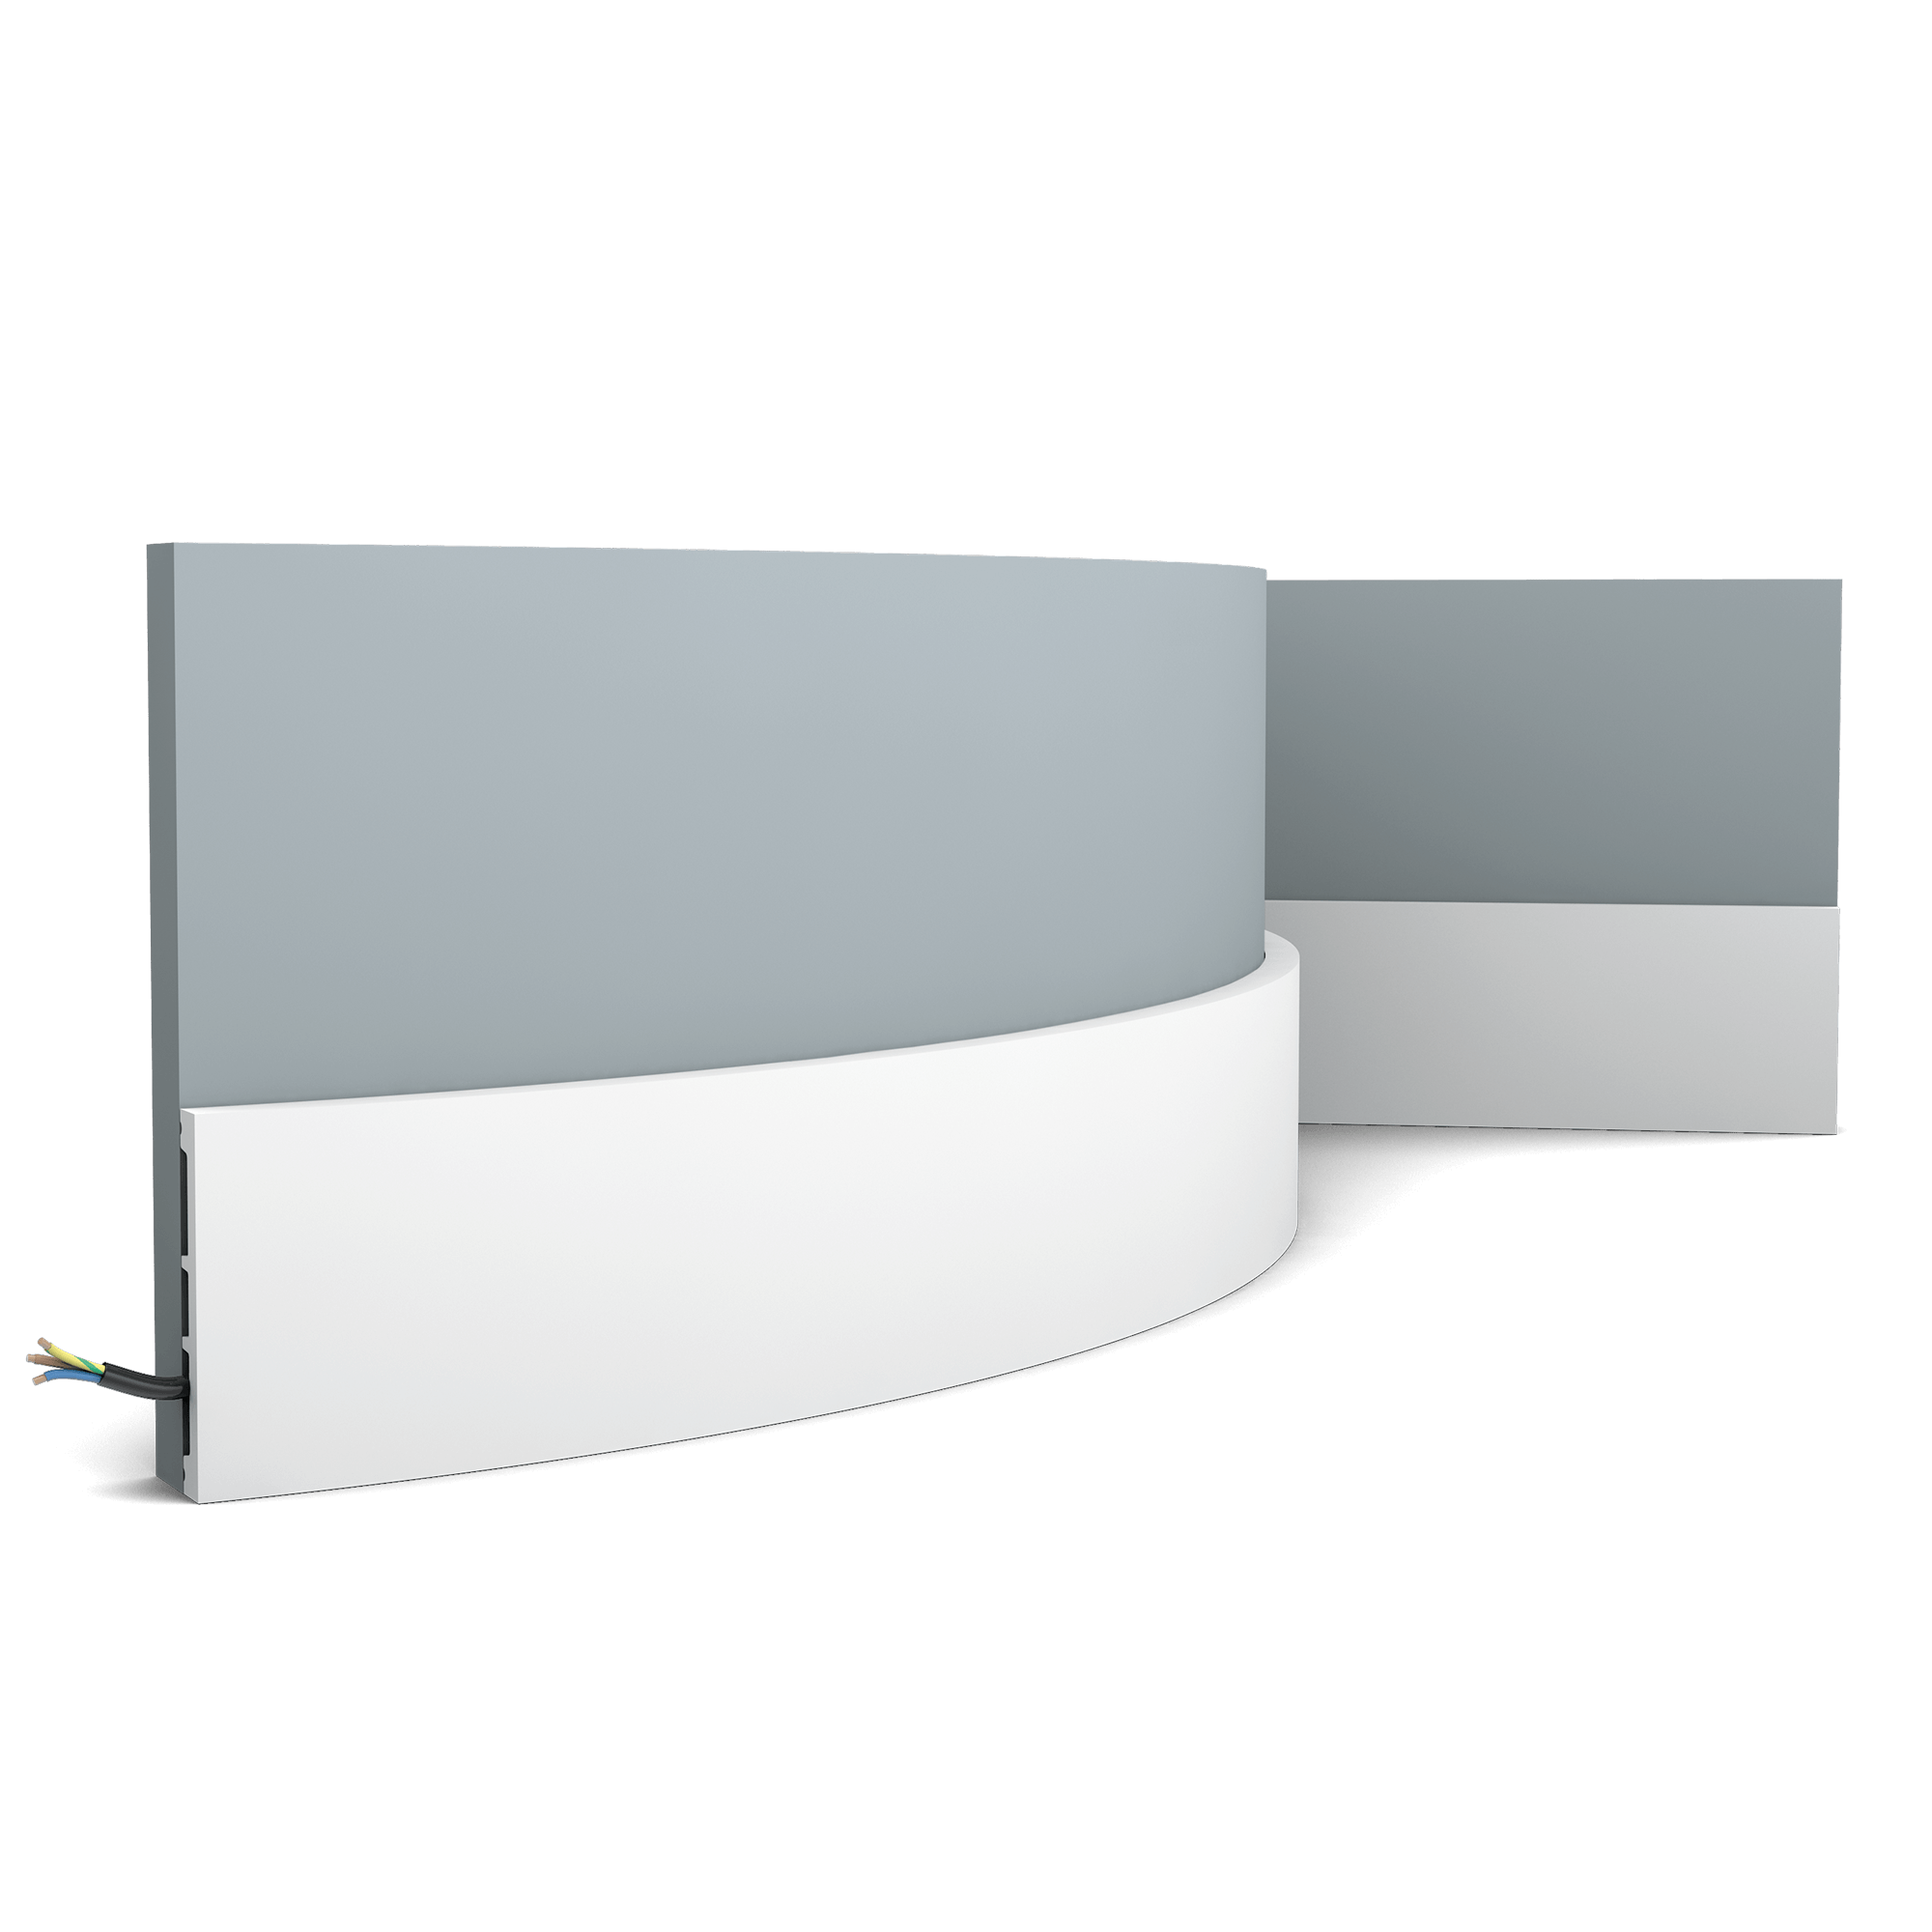 Flexible version of the SX163. Our simplest skirting board is part of the SQUARE family. Thanks to its Flex technology, curved walls and surfaces are no problem. Installation remark: It is necessary to screw this profile on the wall. Flex Radius: R min = 35 cm